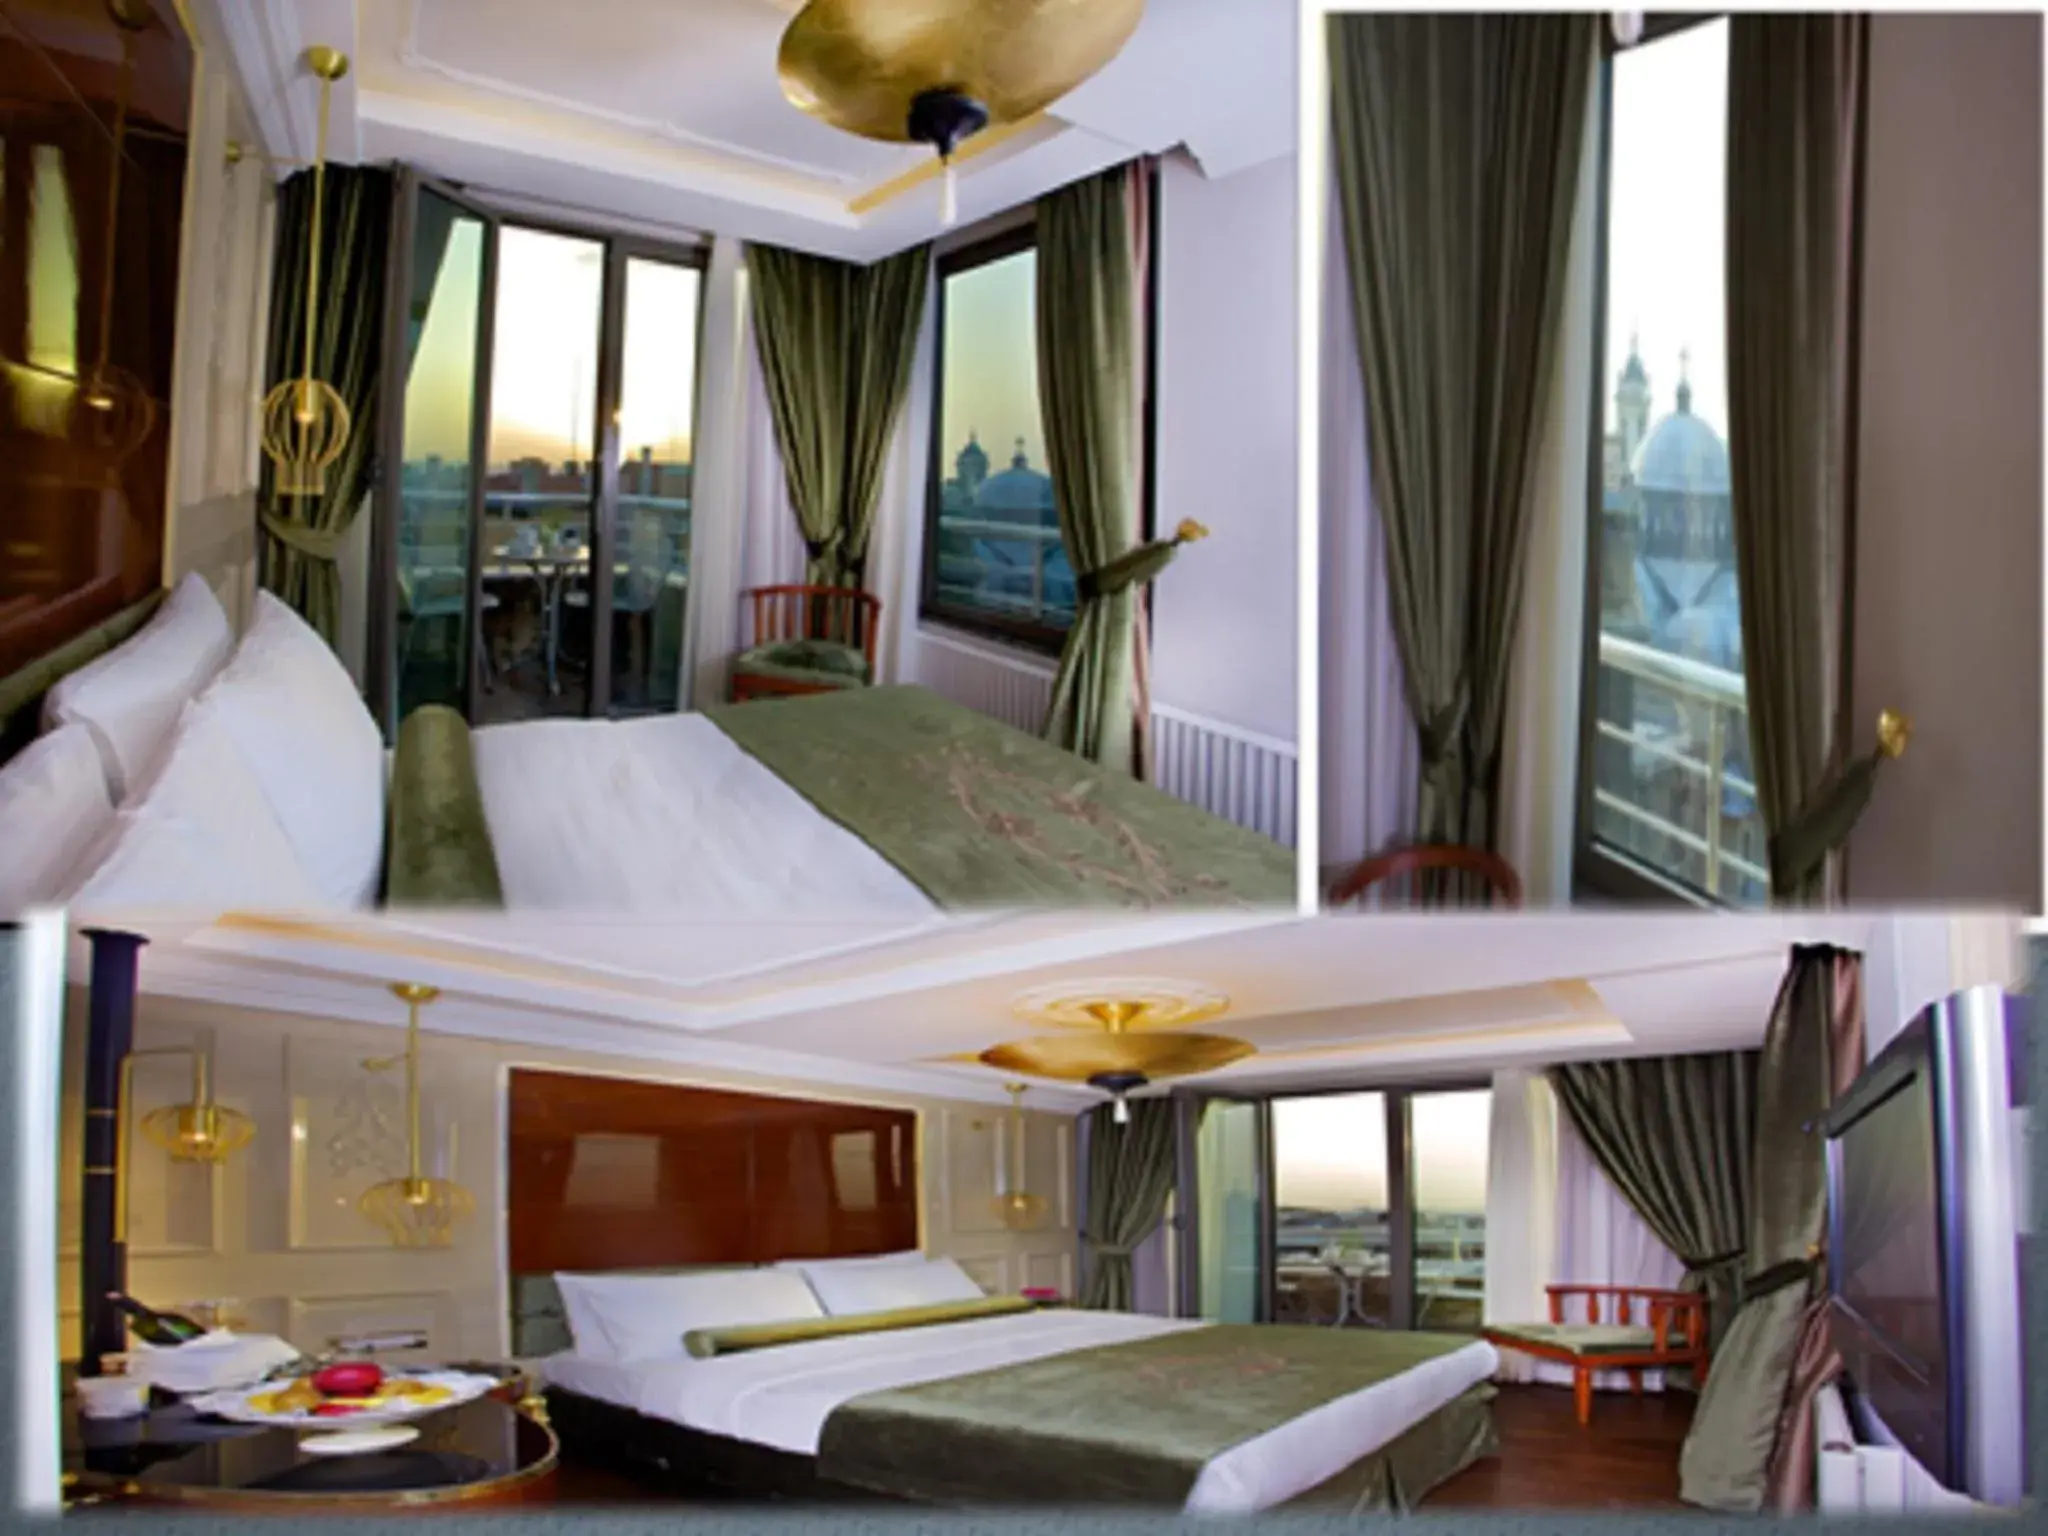 Penthouse Suite with Taksim Square View in Taksim Star Hotel